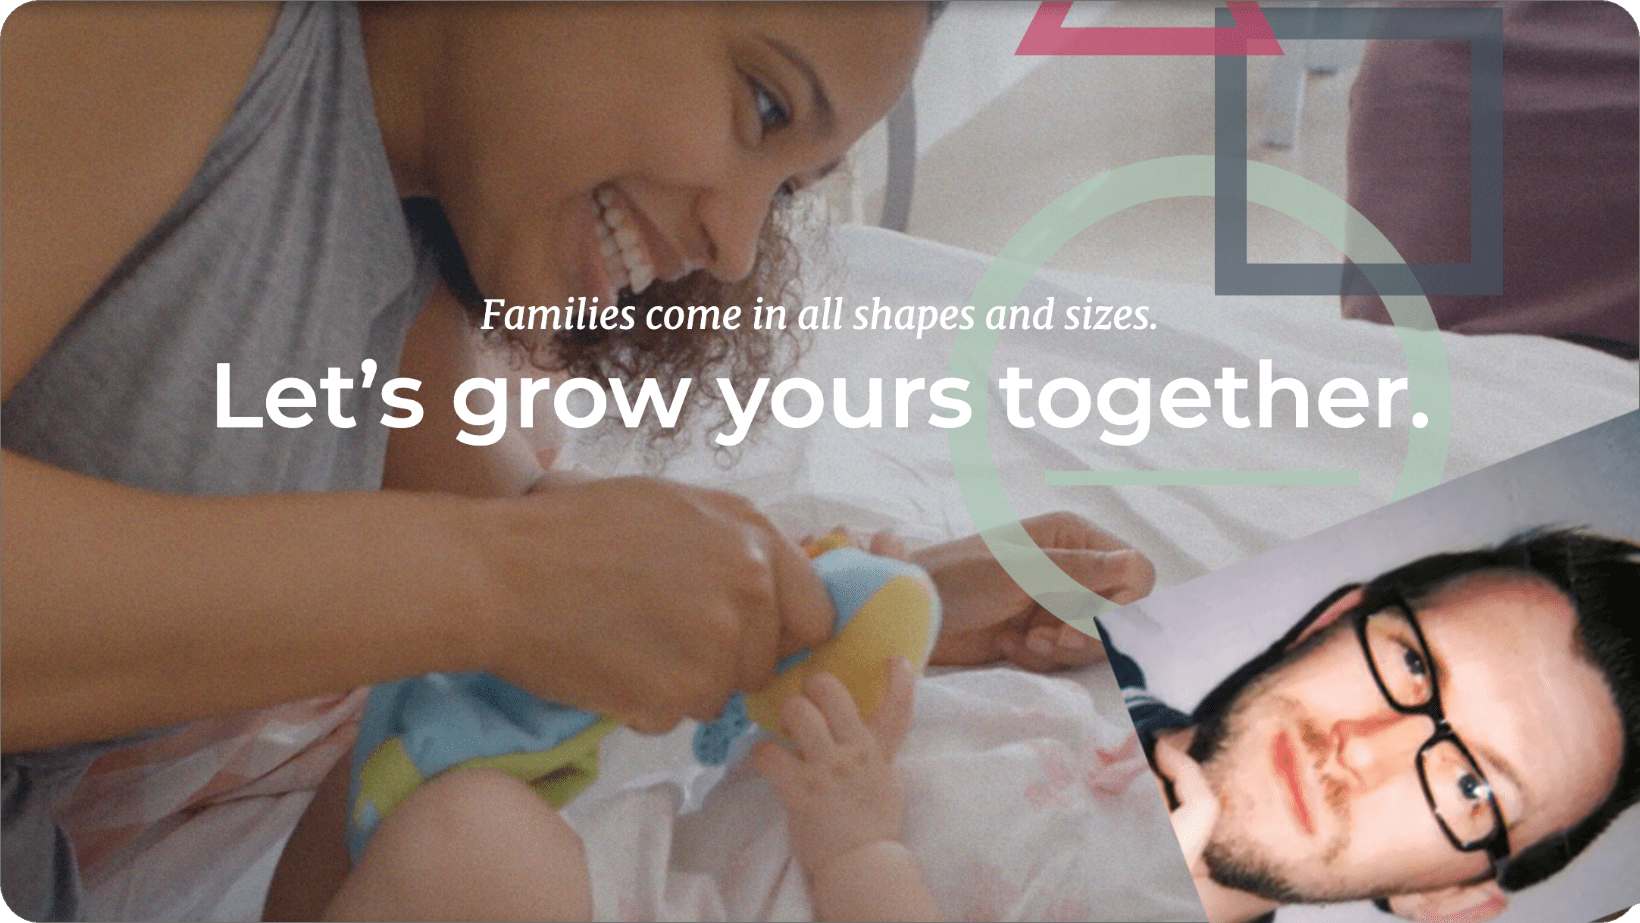 image of a woman playing with a baby but a photo of kevin's face is over the baby's face "families come in all shapes and sizes. let's grow yours together"